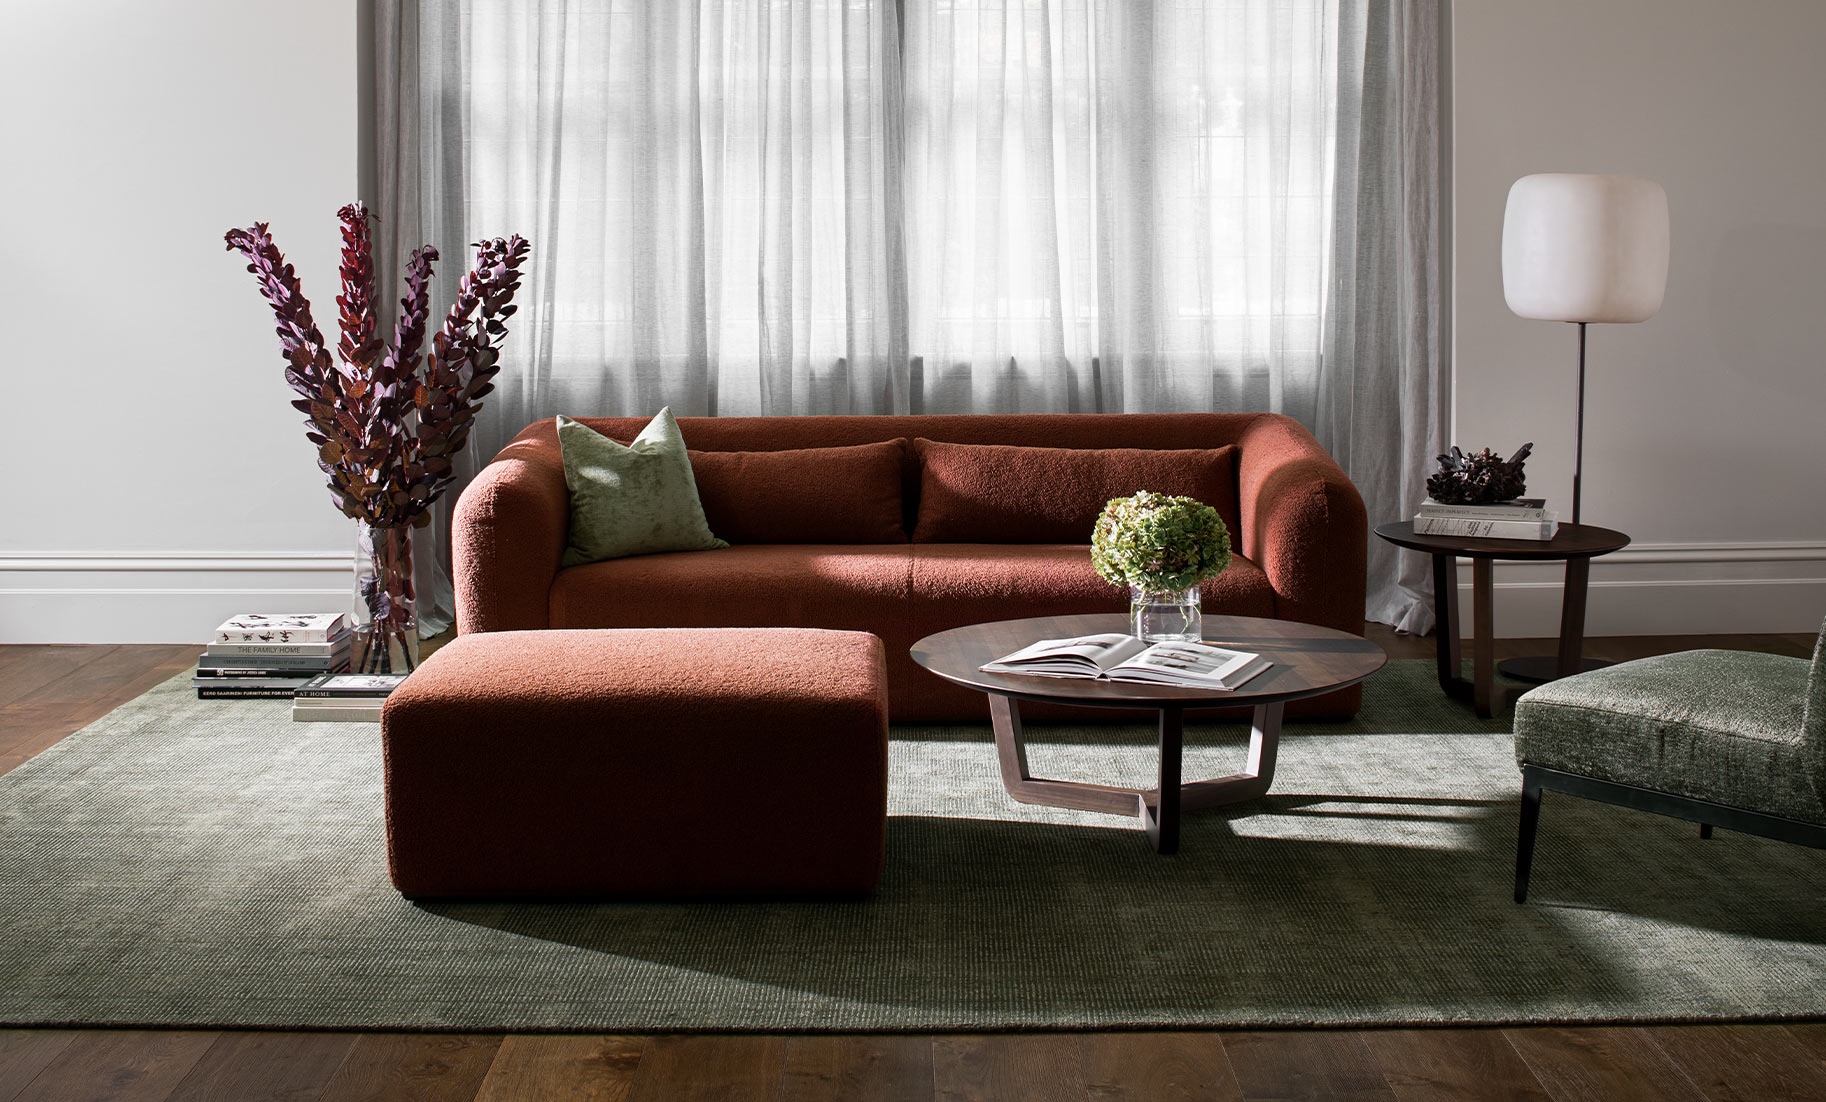 Insitu featuring garcia rug, mitchell sofa and ottoman, theodore table and milton chair by The Rug Collection